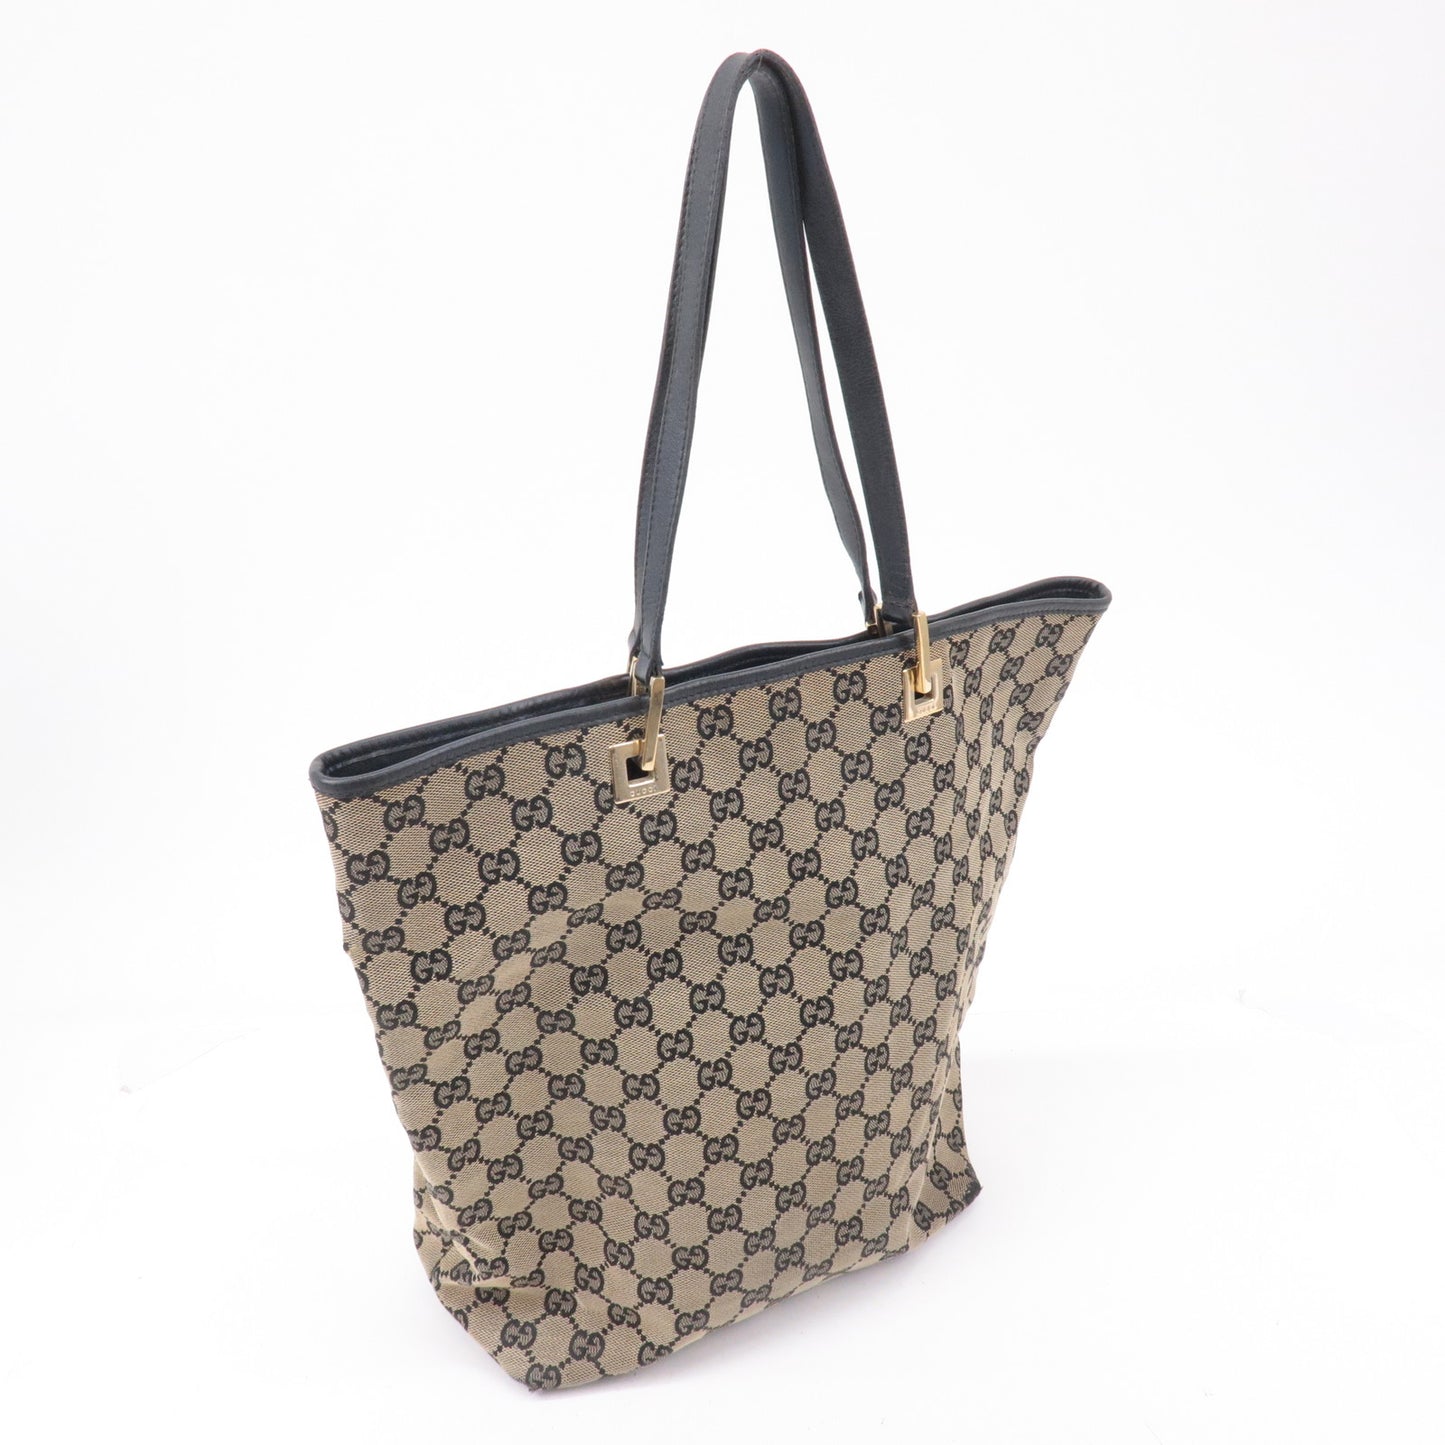 GUCCI GG Canvas Leather Tote Bag Hand Bag Beige Navy 002・1098